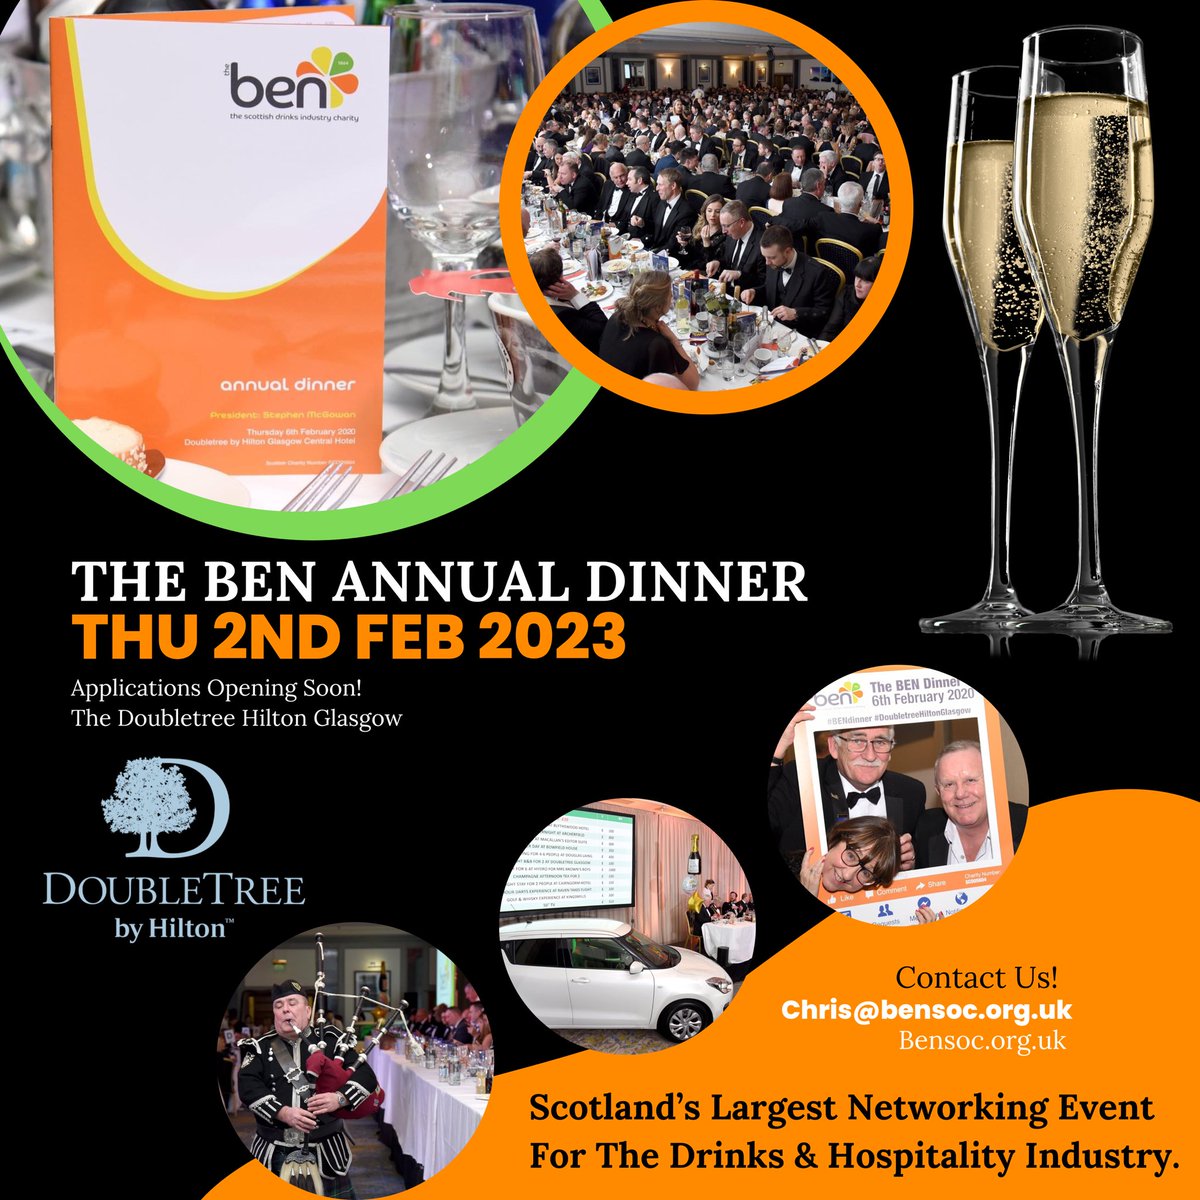 #scotlands #largest #networkingevent for the #drinks and #hospitality industry! Applications opening very soon! @DTGlasgowCtrl